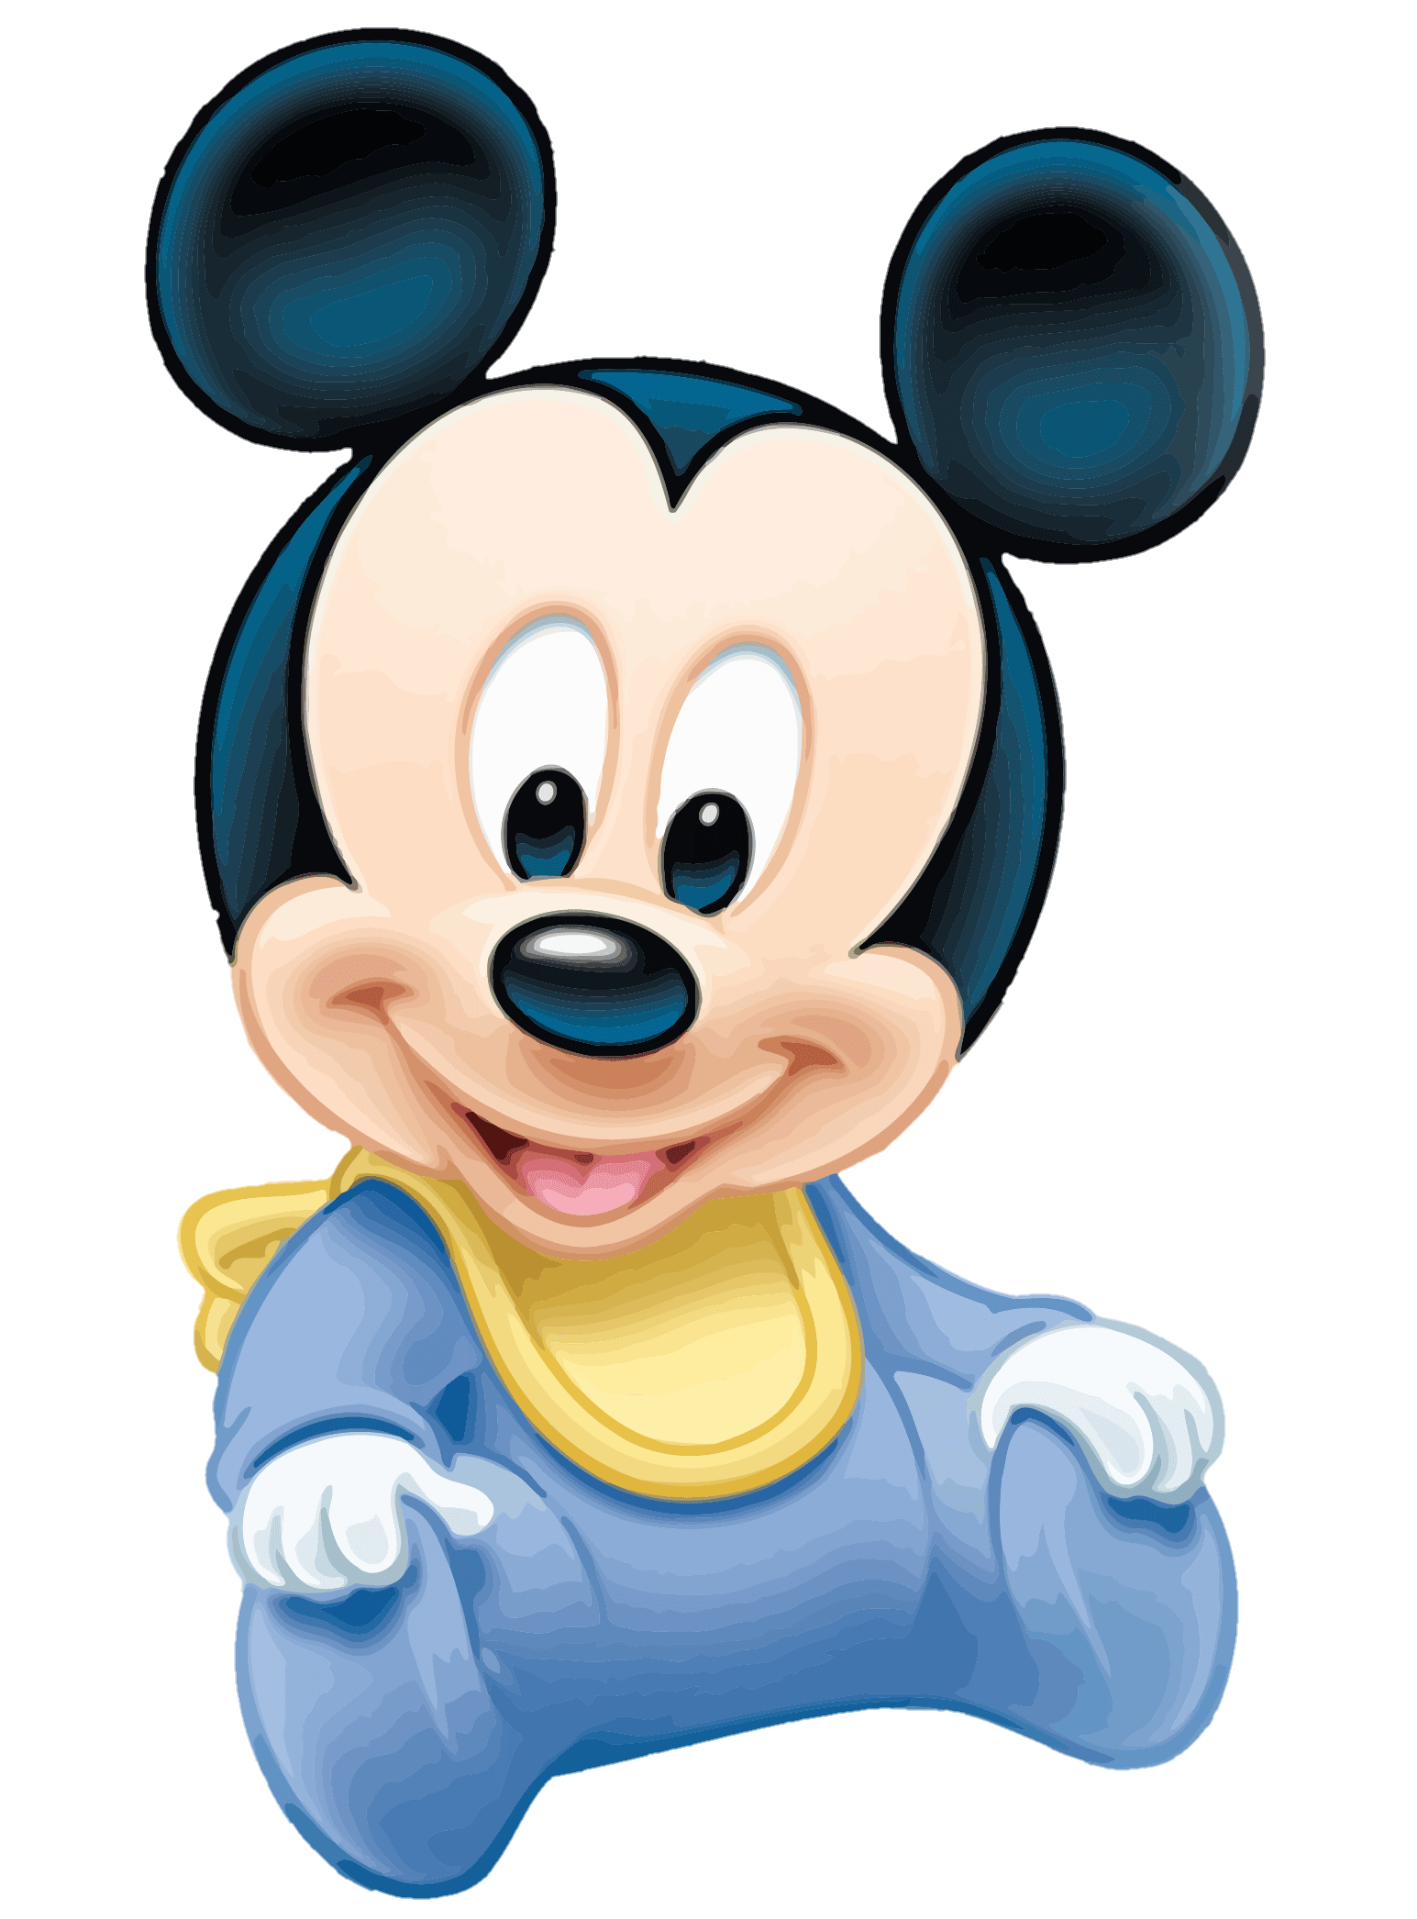 mickey-mouse-png-from-pngfre-4